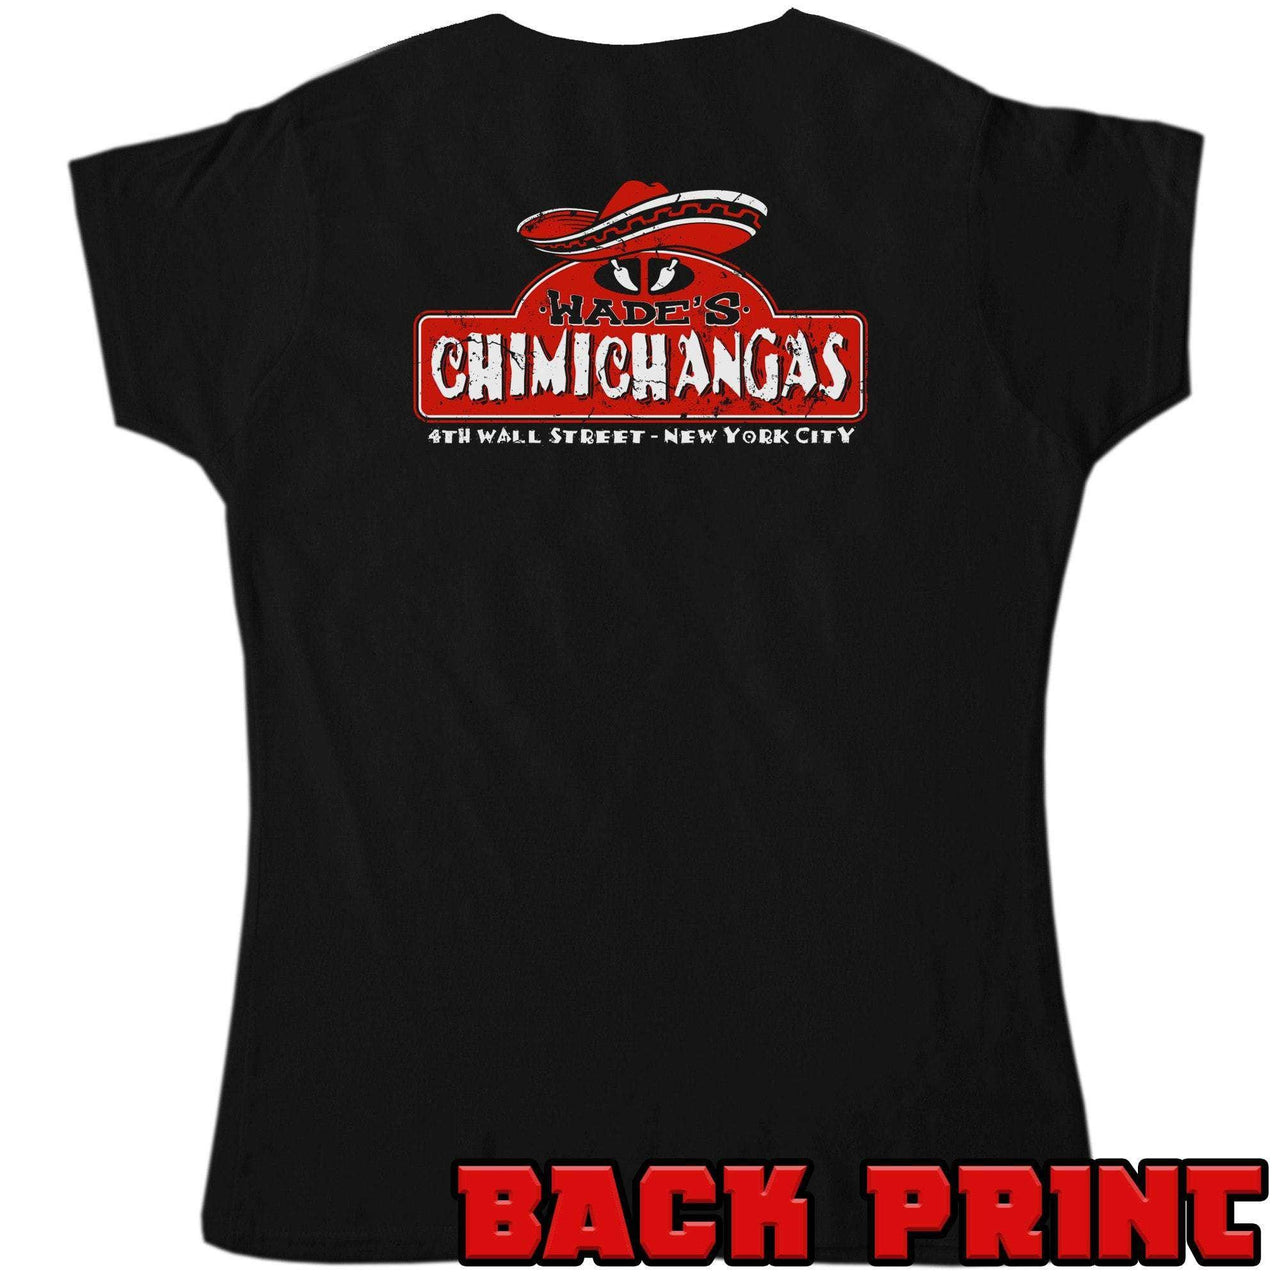 Wades Chimichangas with Back Print T-Shirt for Women 8Ball